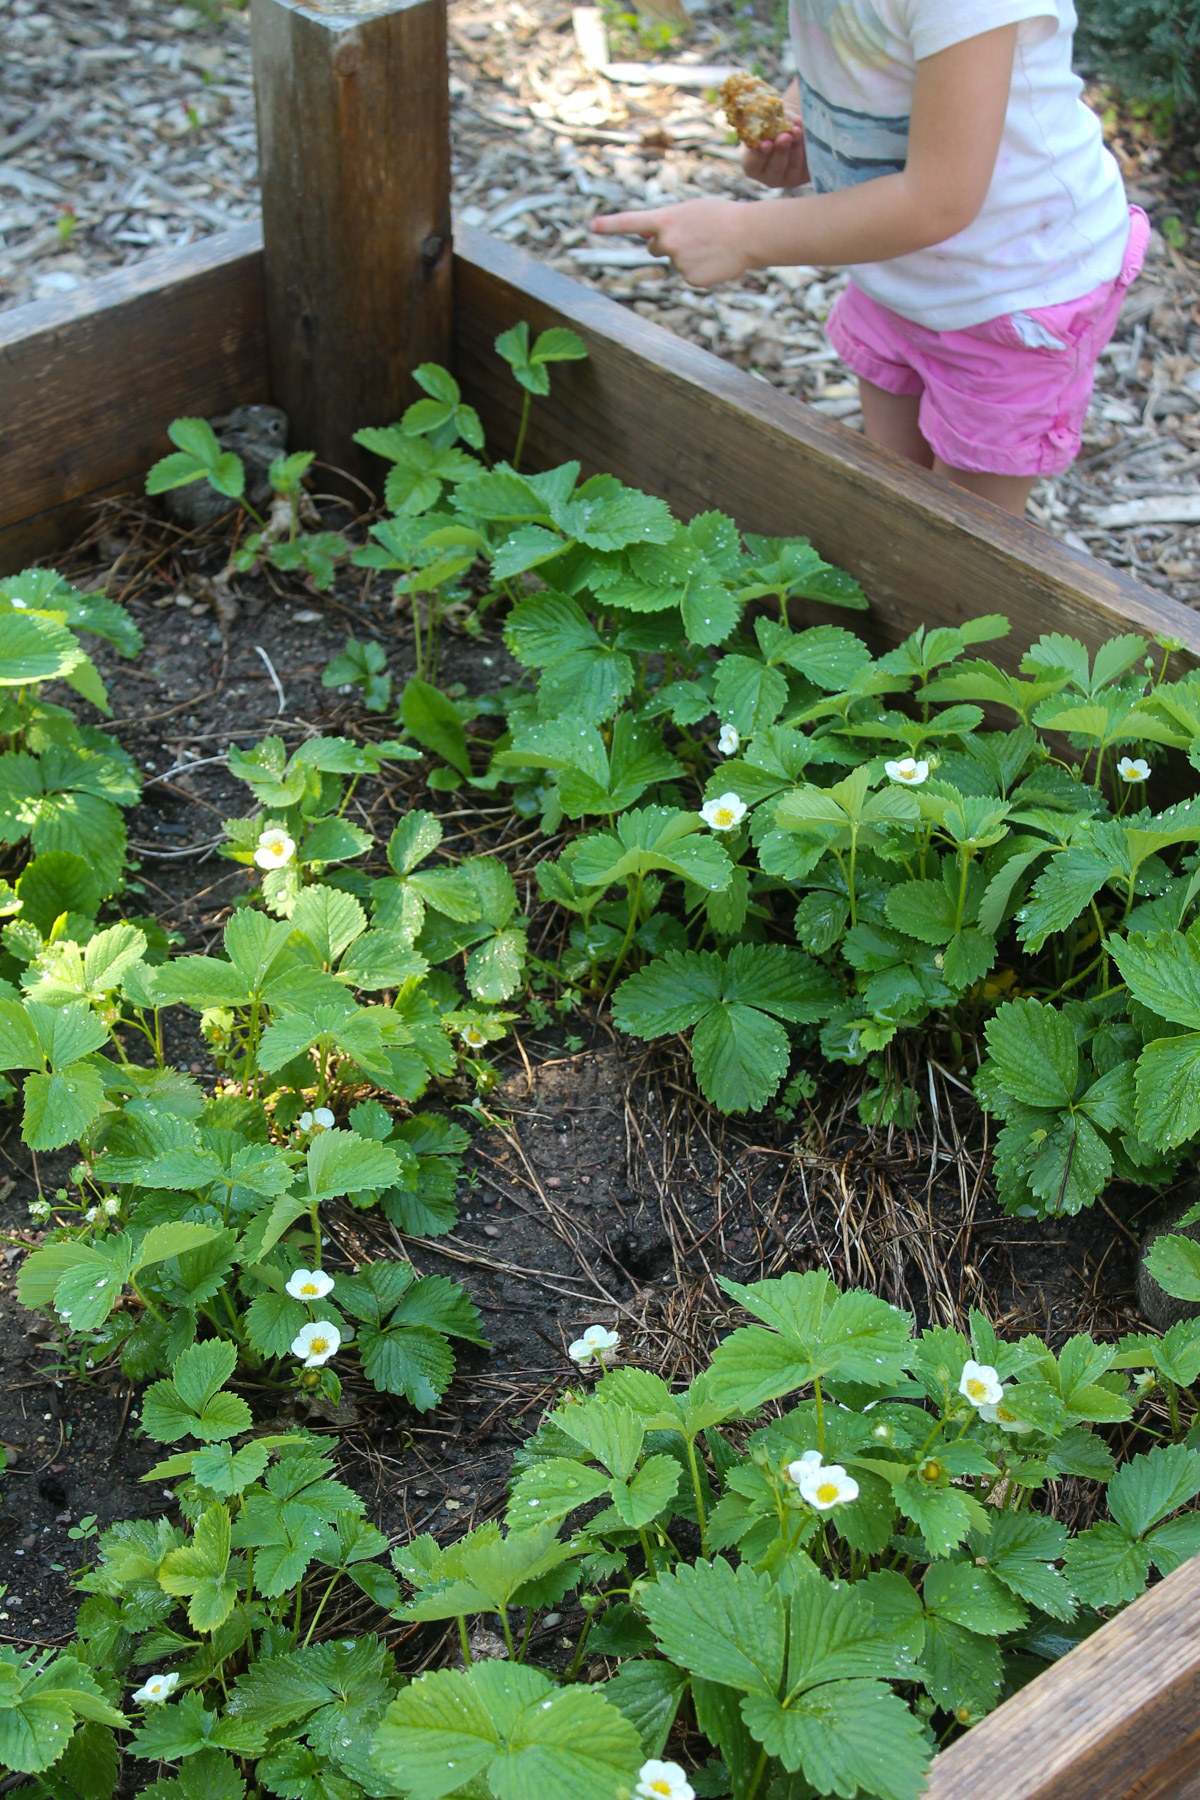 A little girl watching bunnies in the raised bed vegetable garden.